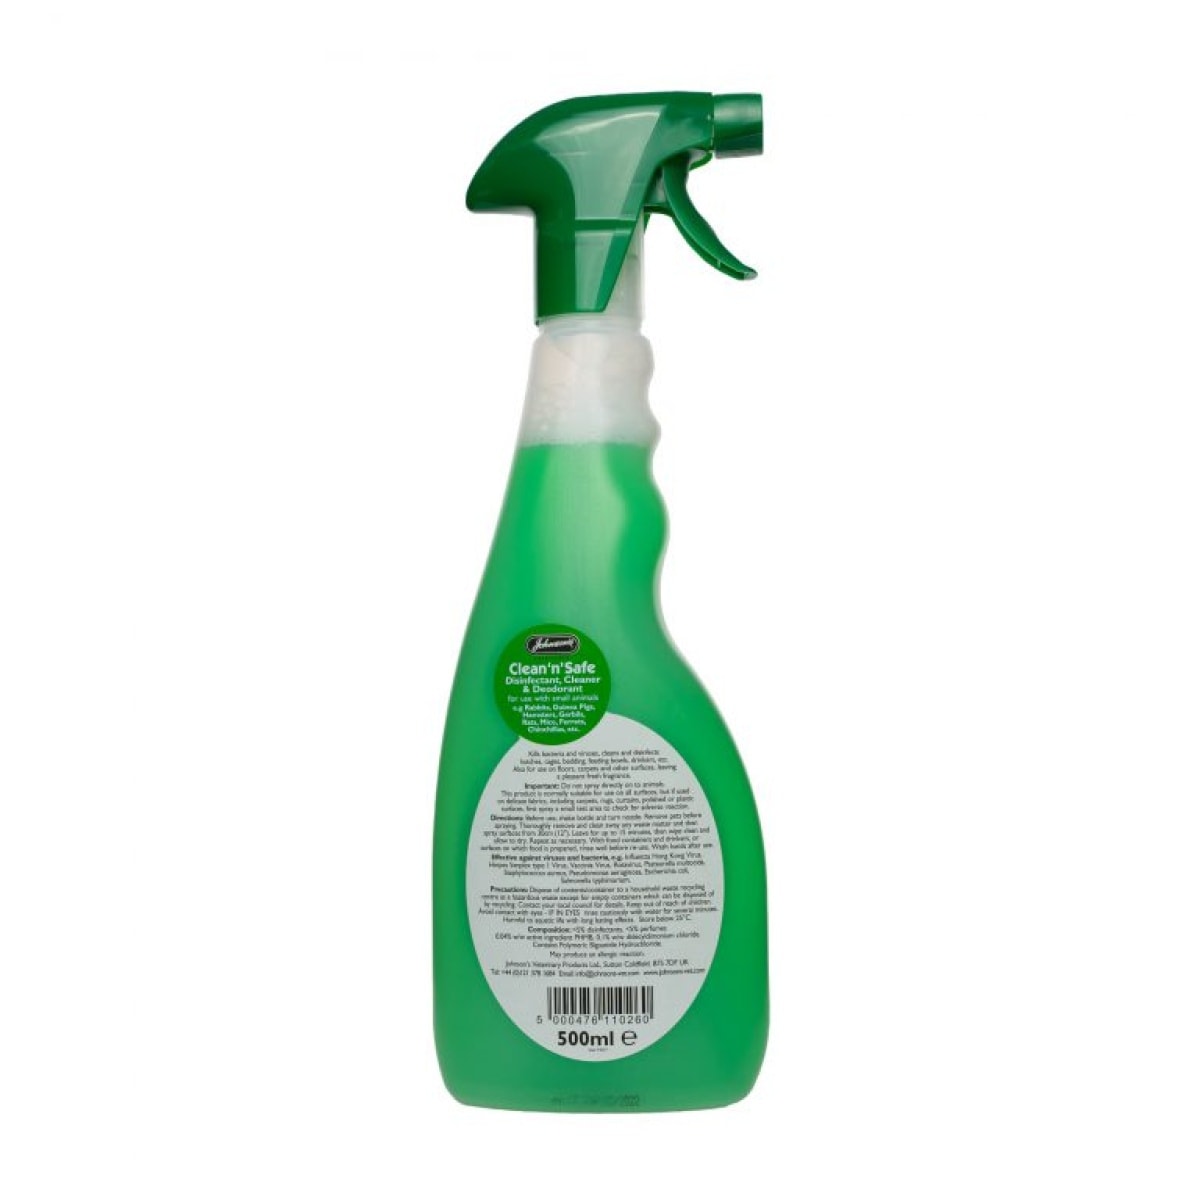 Johnson's Clean & Safe Small Animal 500ml Product Image